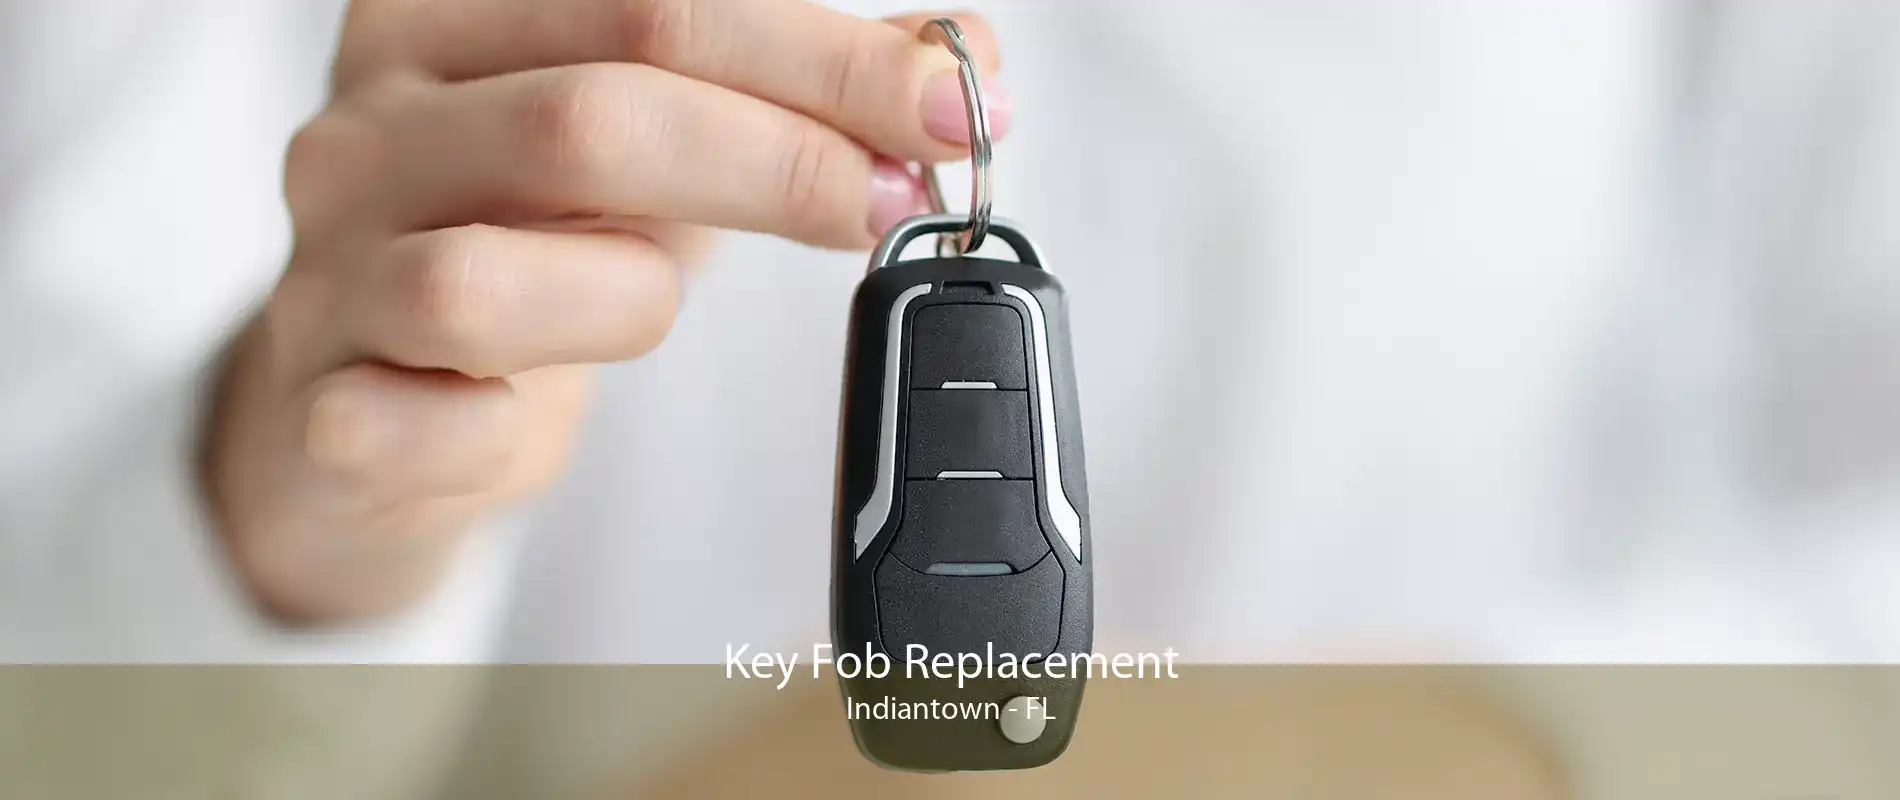 Key Fob Replacement Indiantown - FL